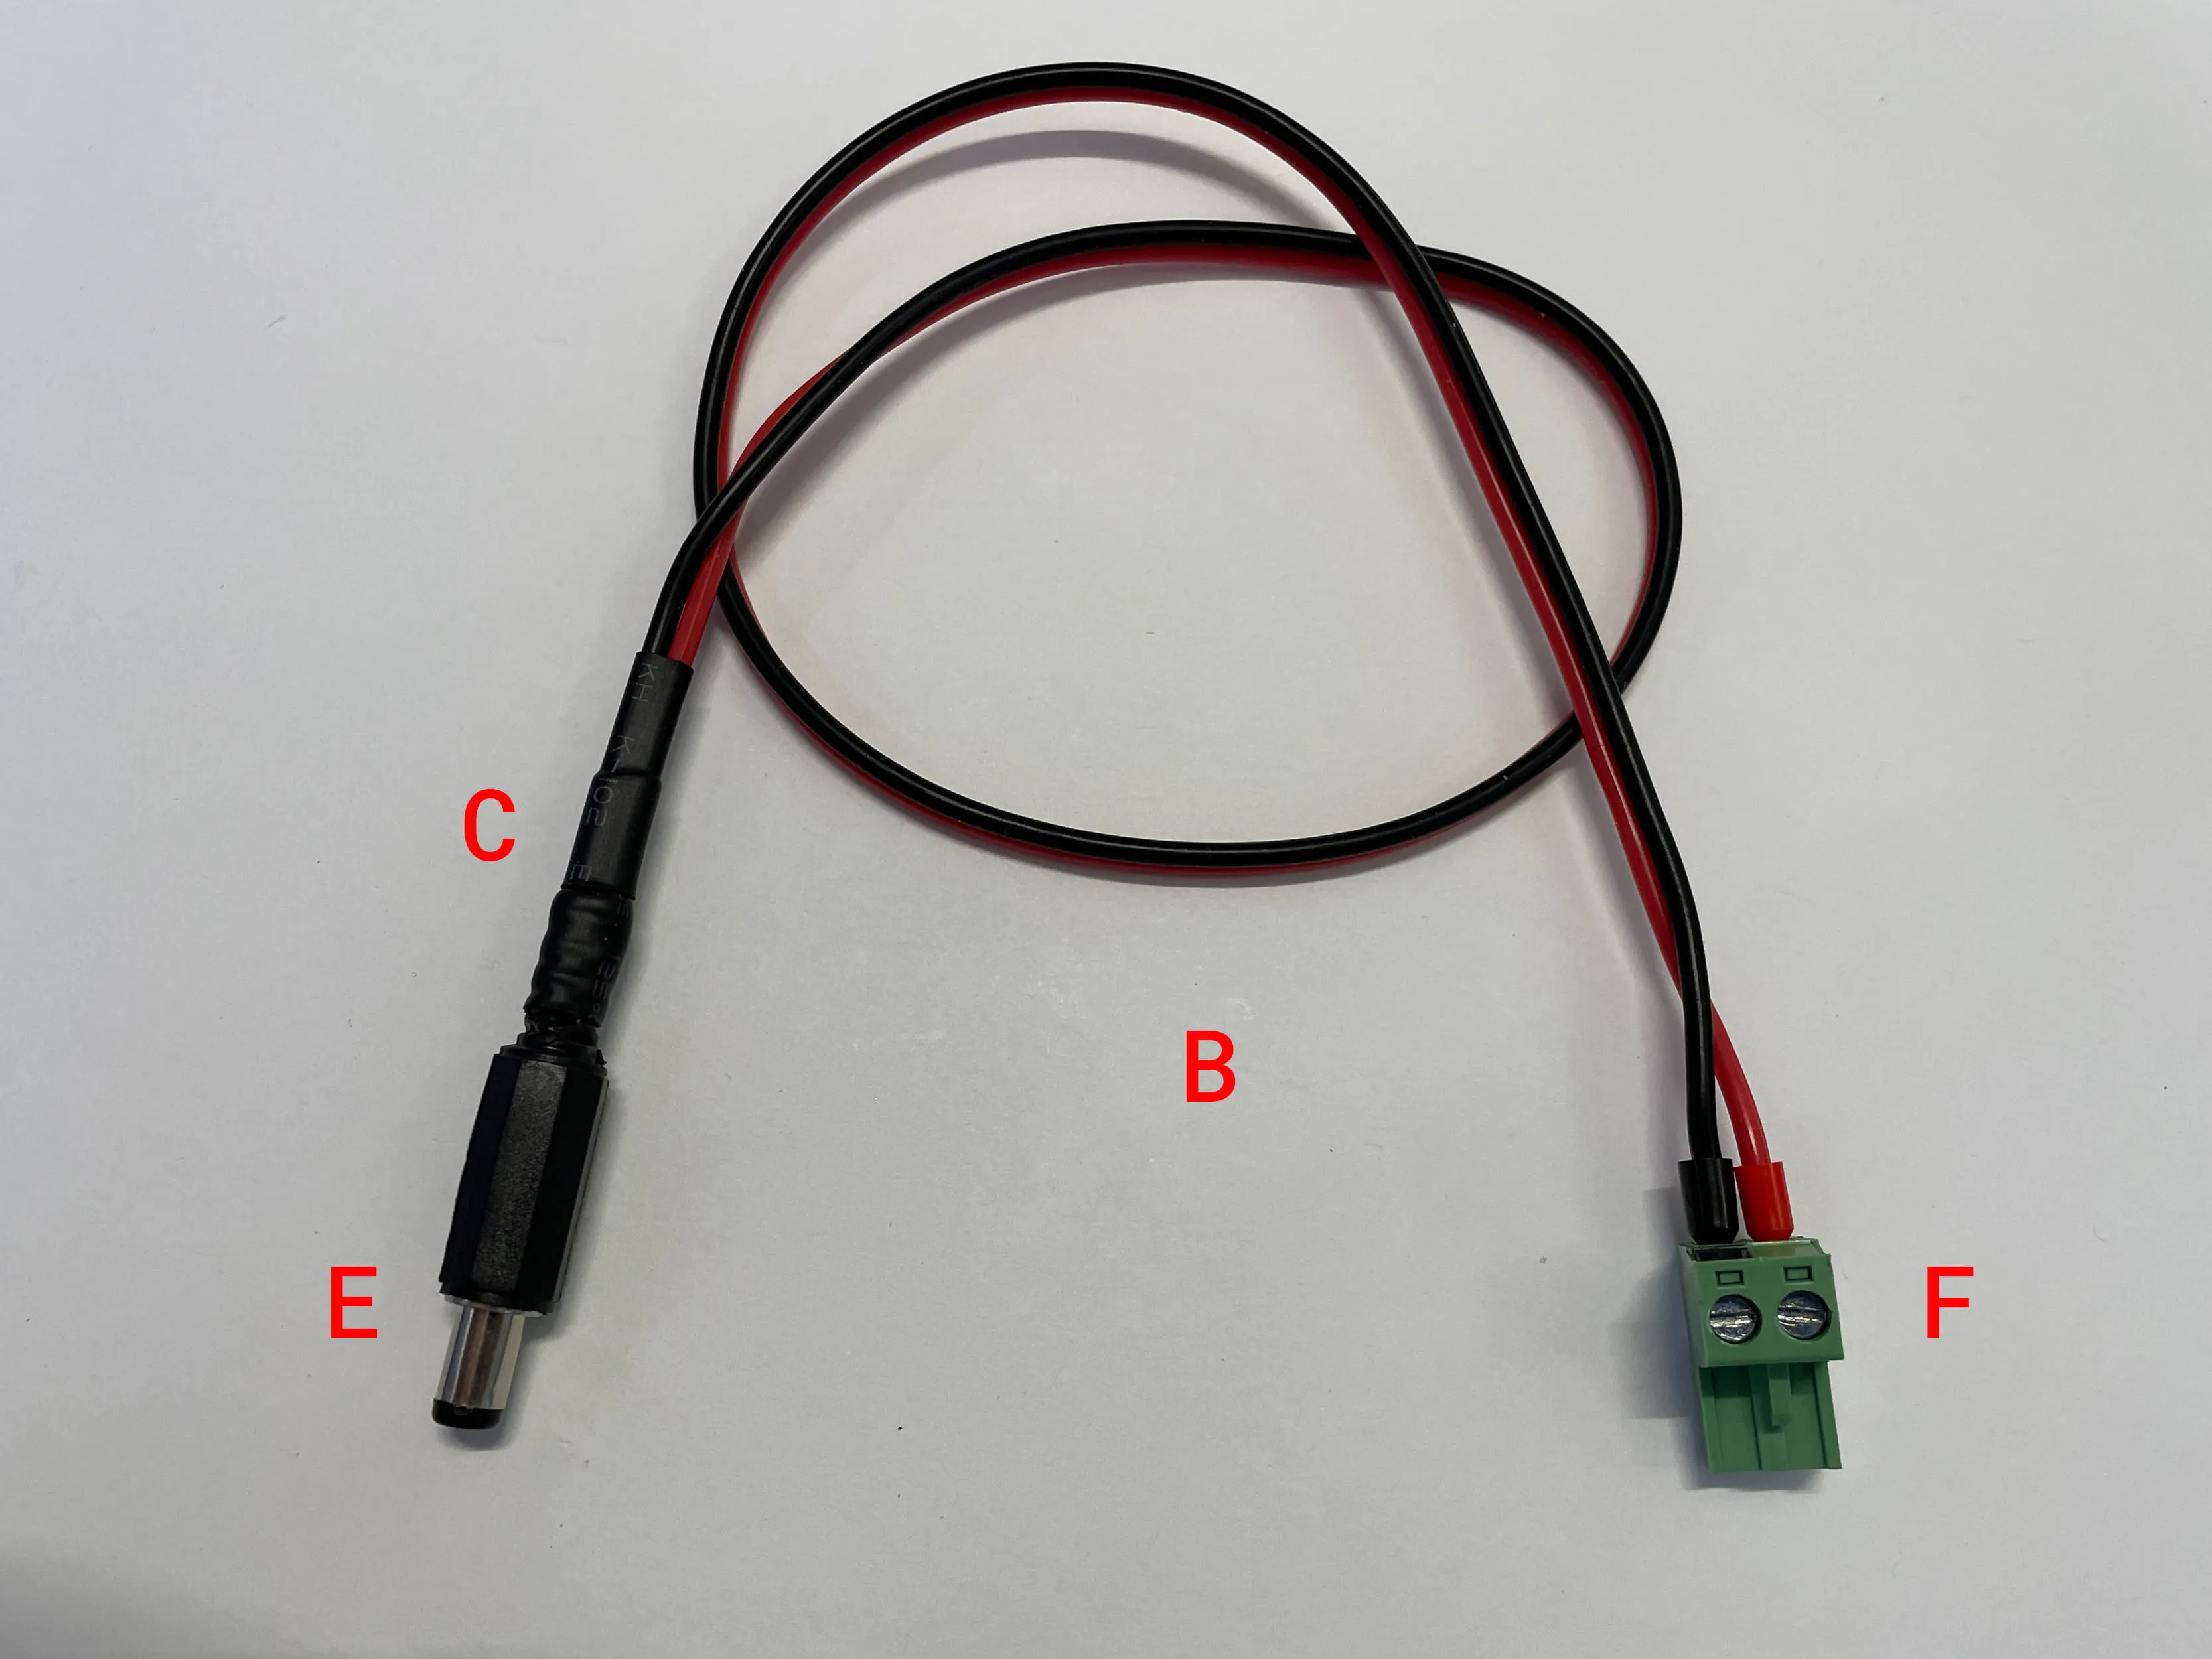 Wiring between female barrel connector and IoT Relay screw terminal